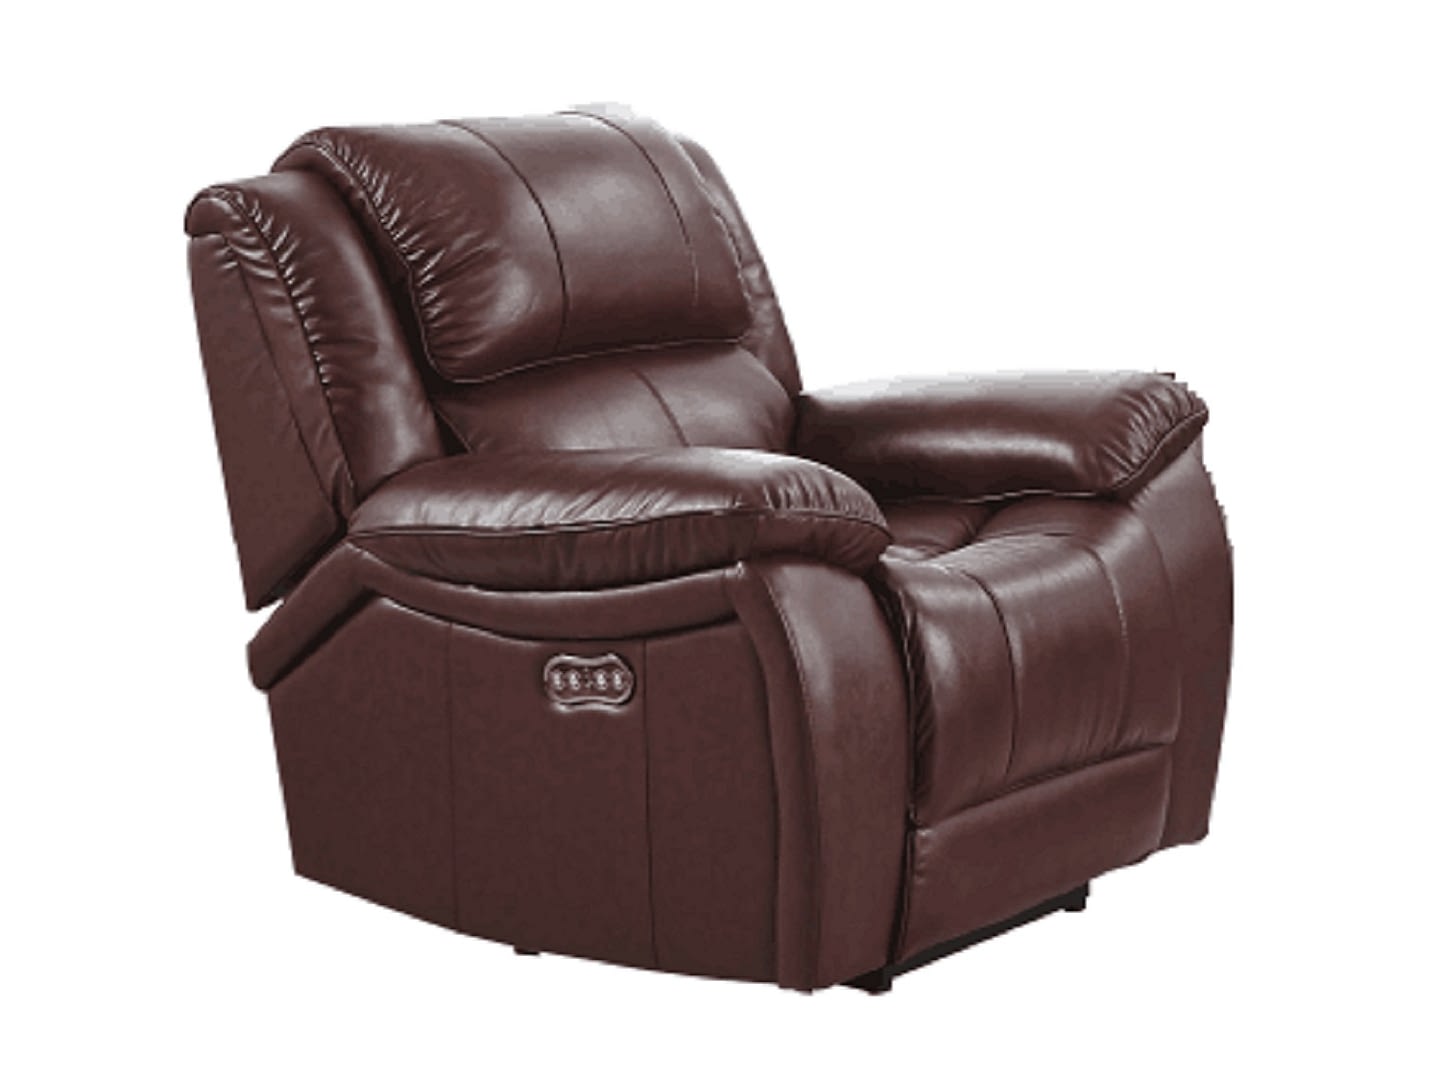 MONTCLARE Leather Power Recliner Chair